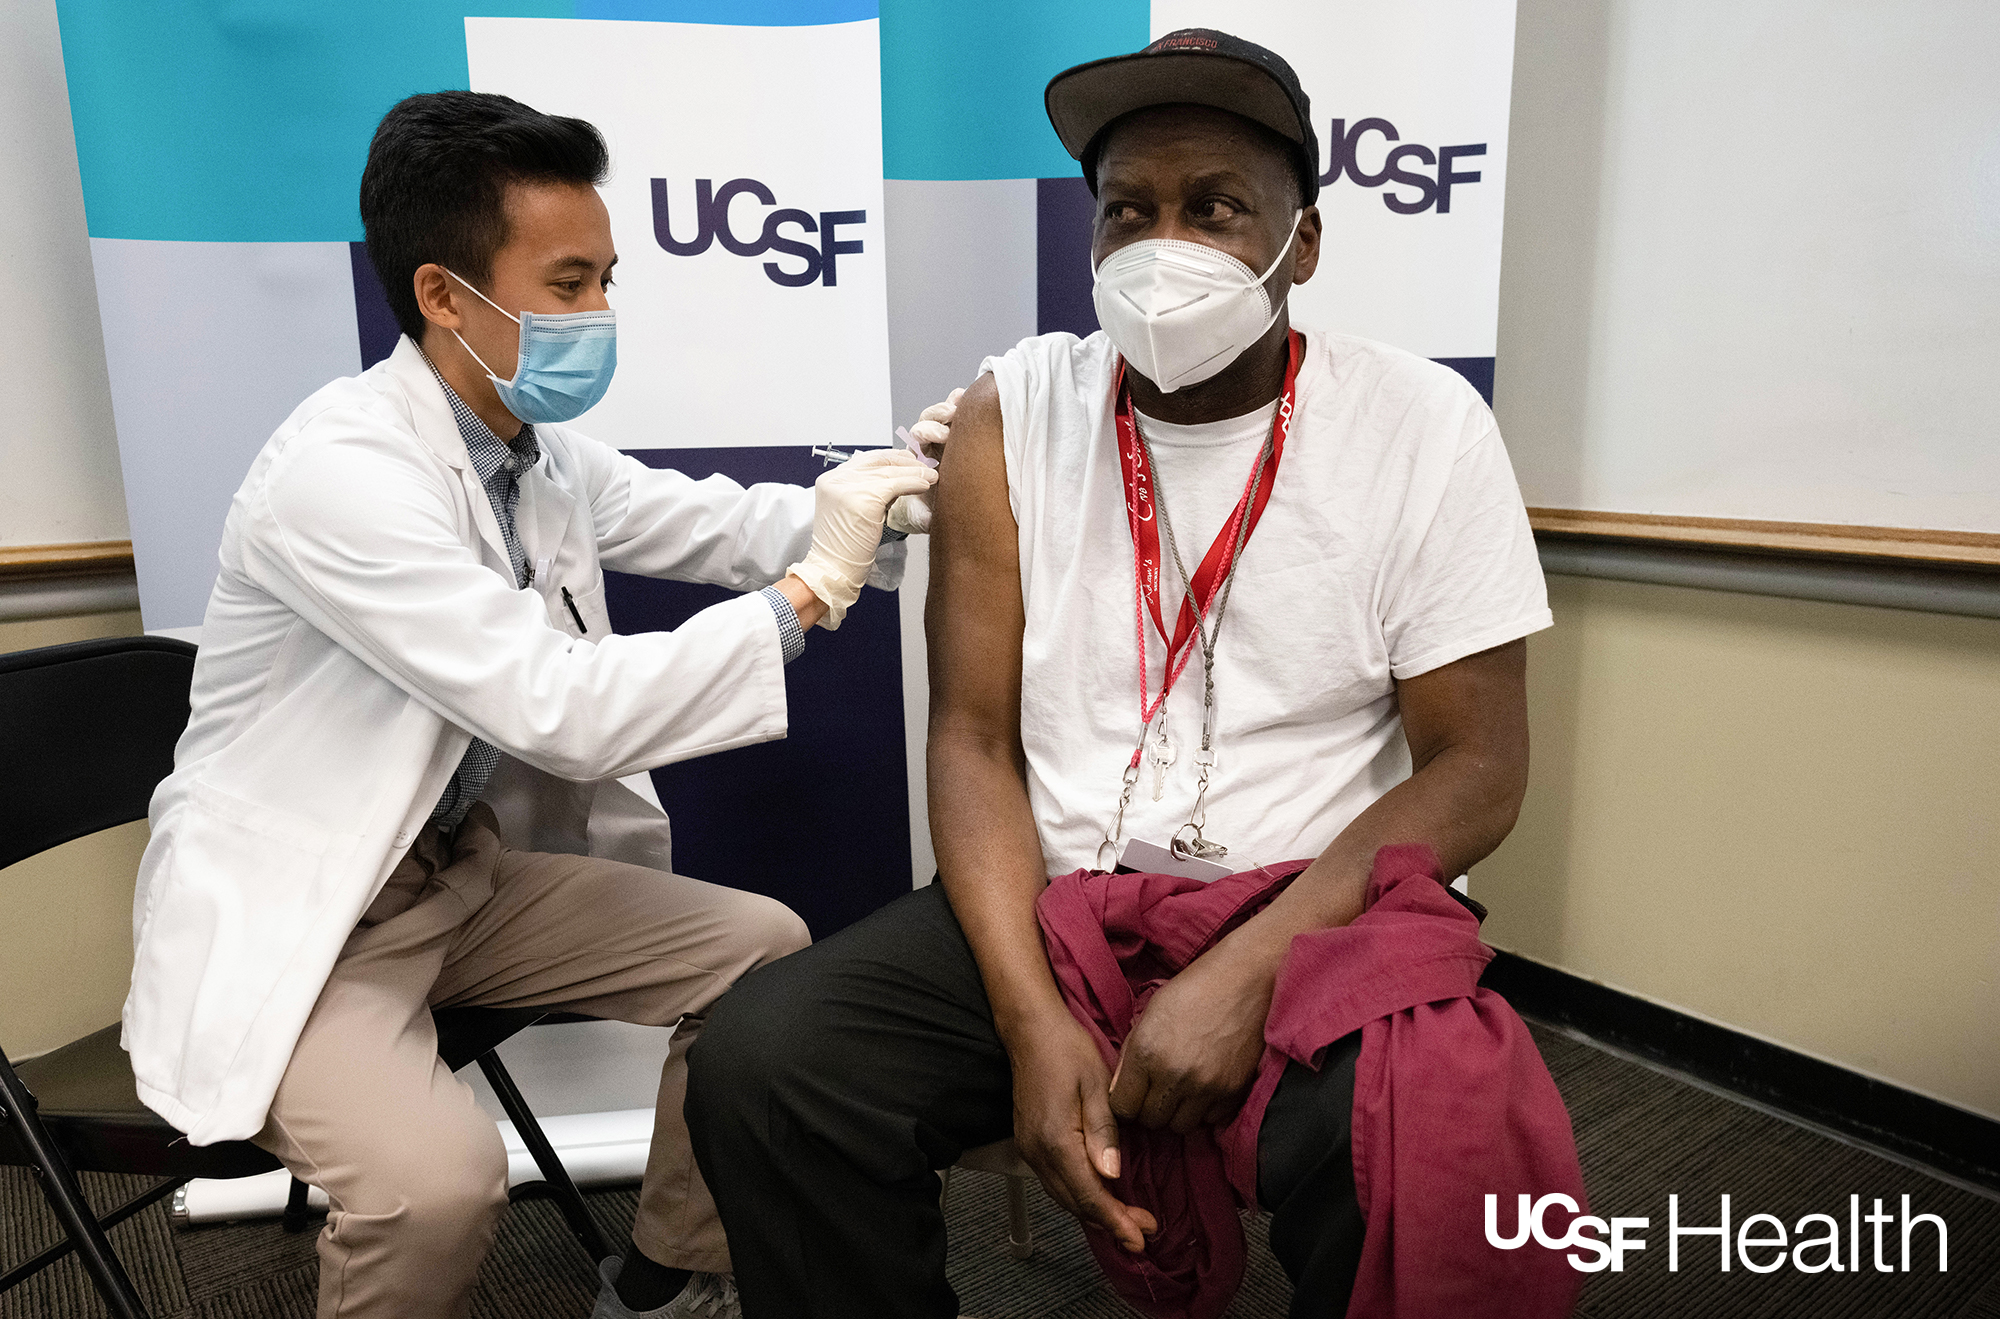 On December 16, 2020, senior custodian William Wyatt was the first frontline health care hero at UCSF to receive a COVID-19 vaccine. Credit: UCSF Health.